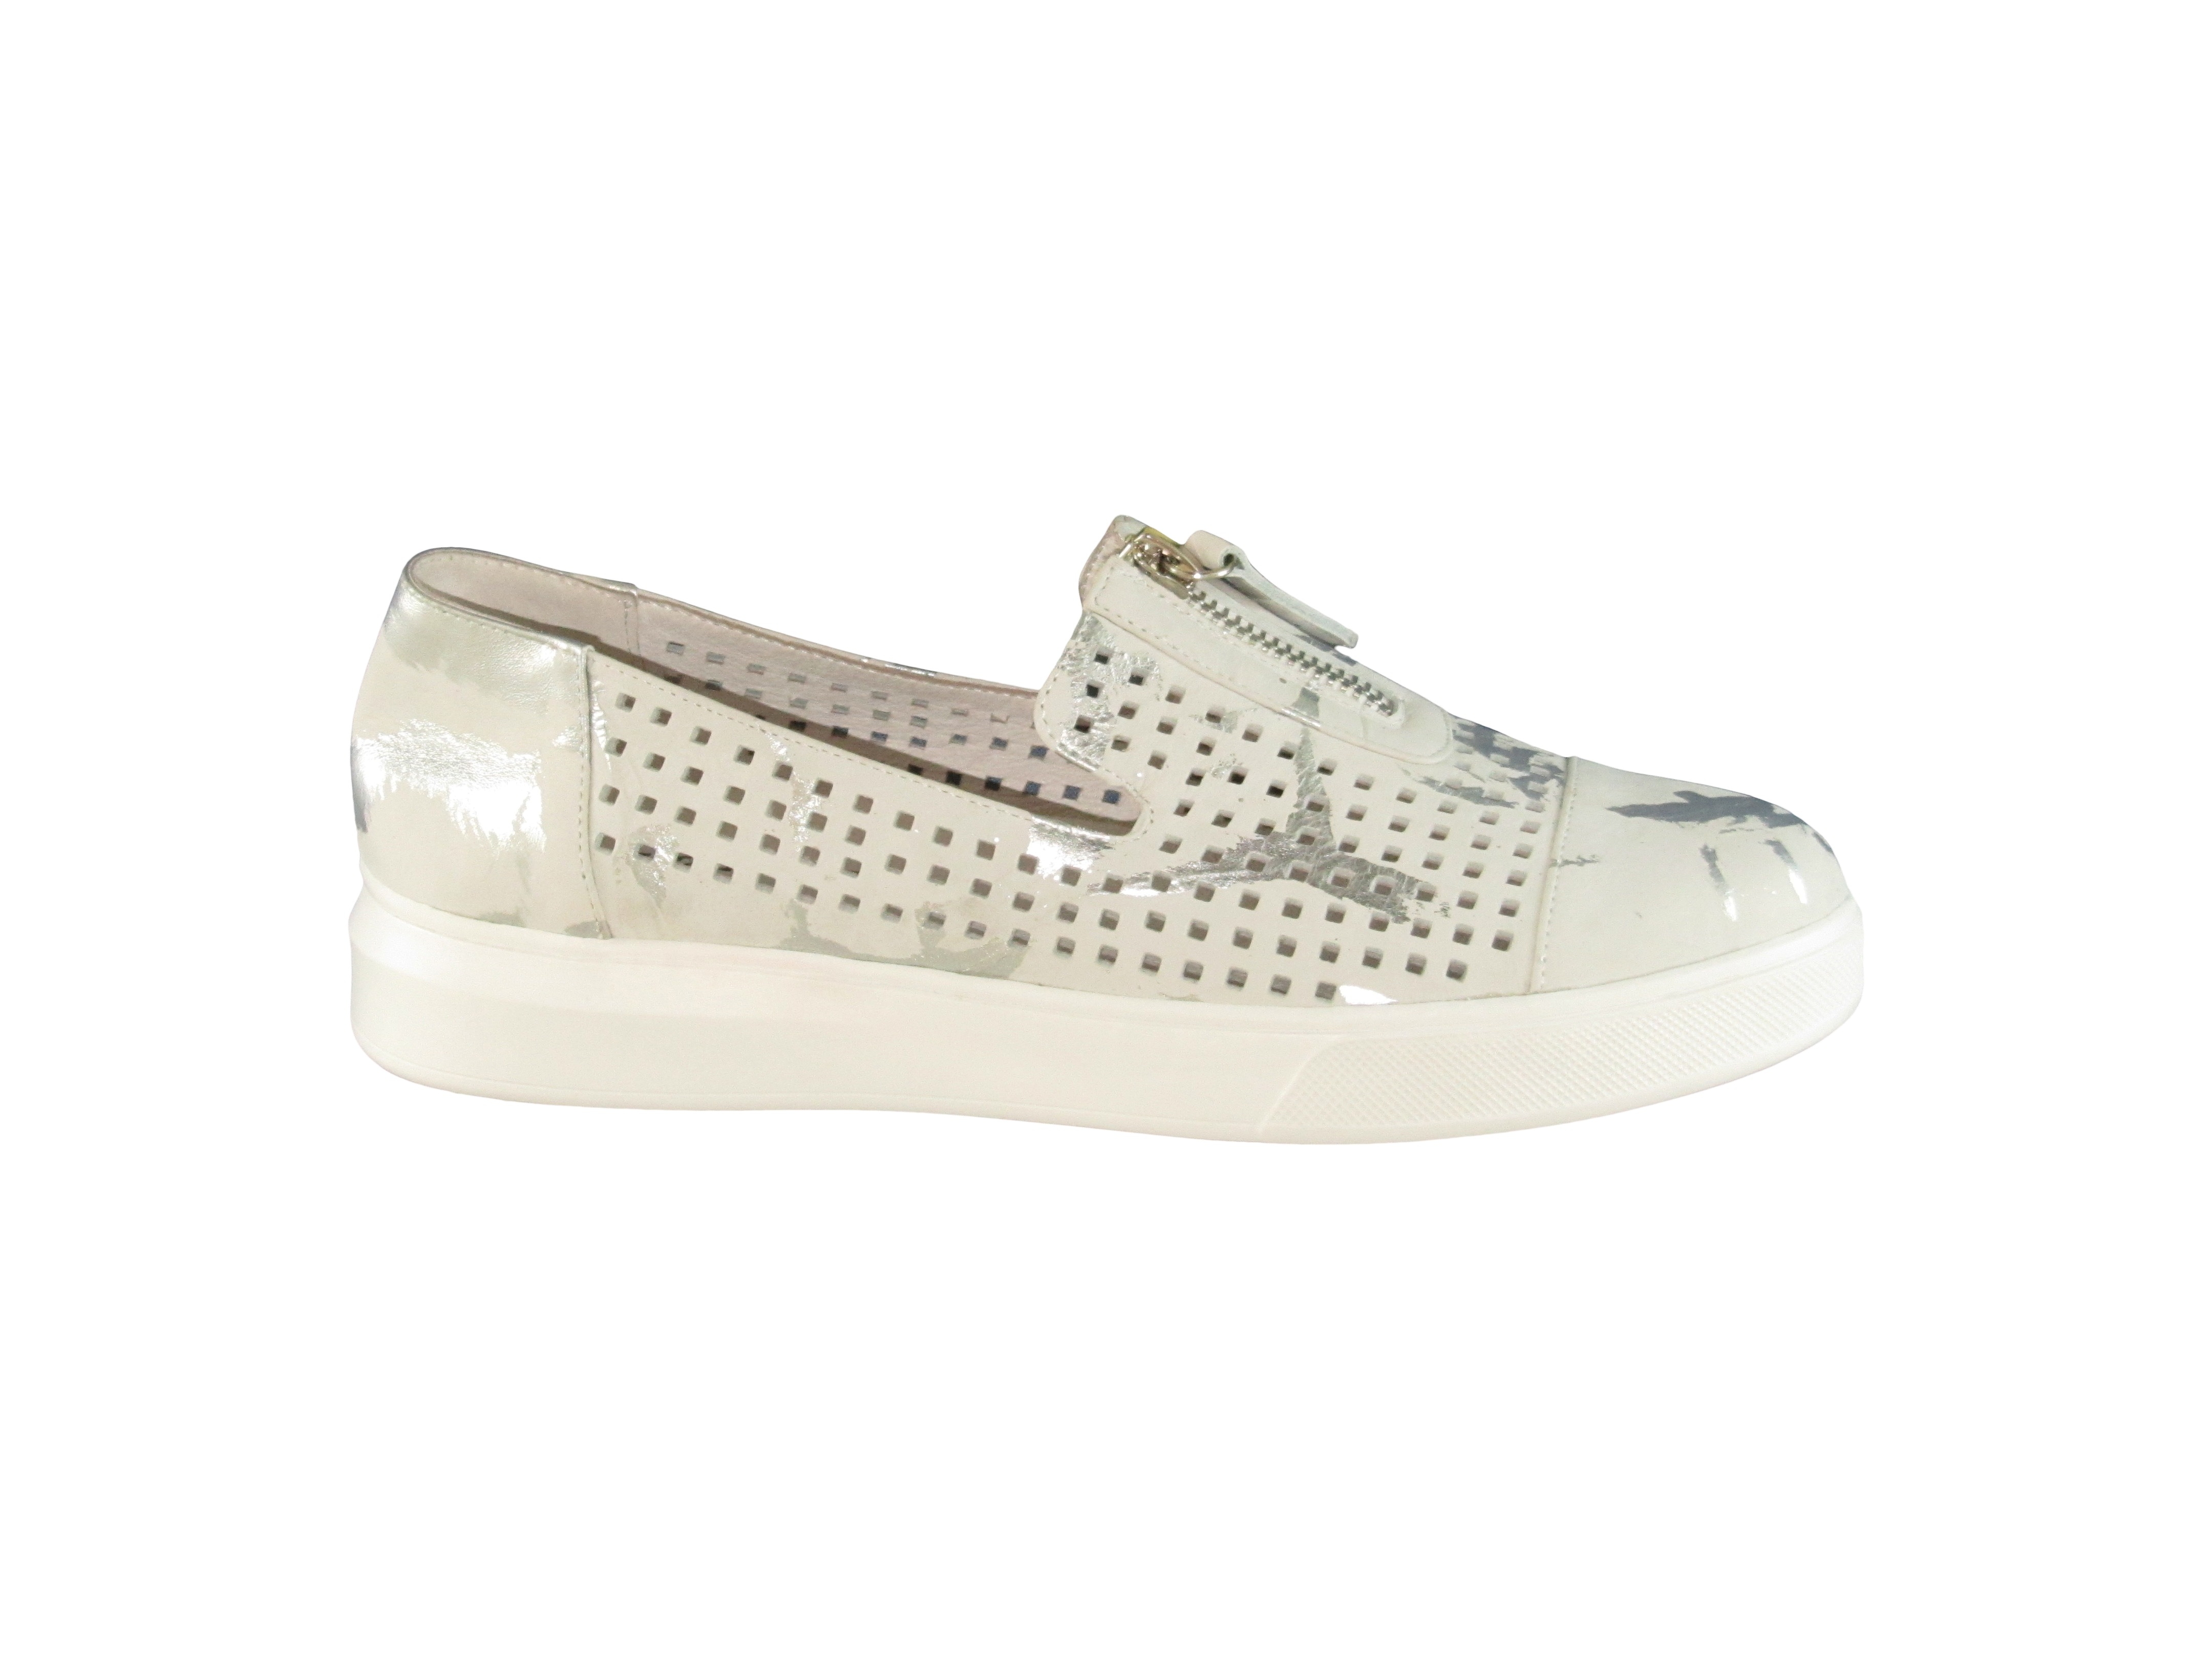 RAW BELLE SCARPE - WOMENS SHOES-SHOES - low to flat : Shirley's Shoes ...